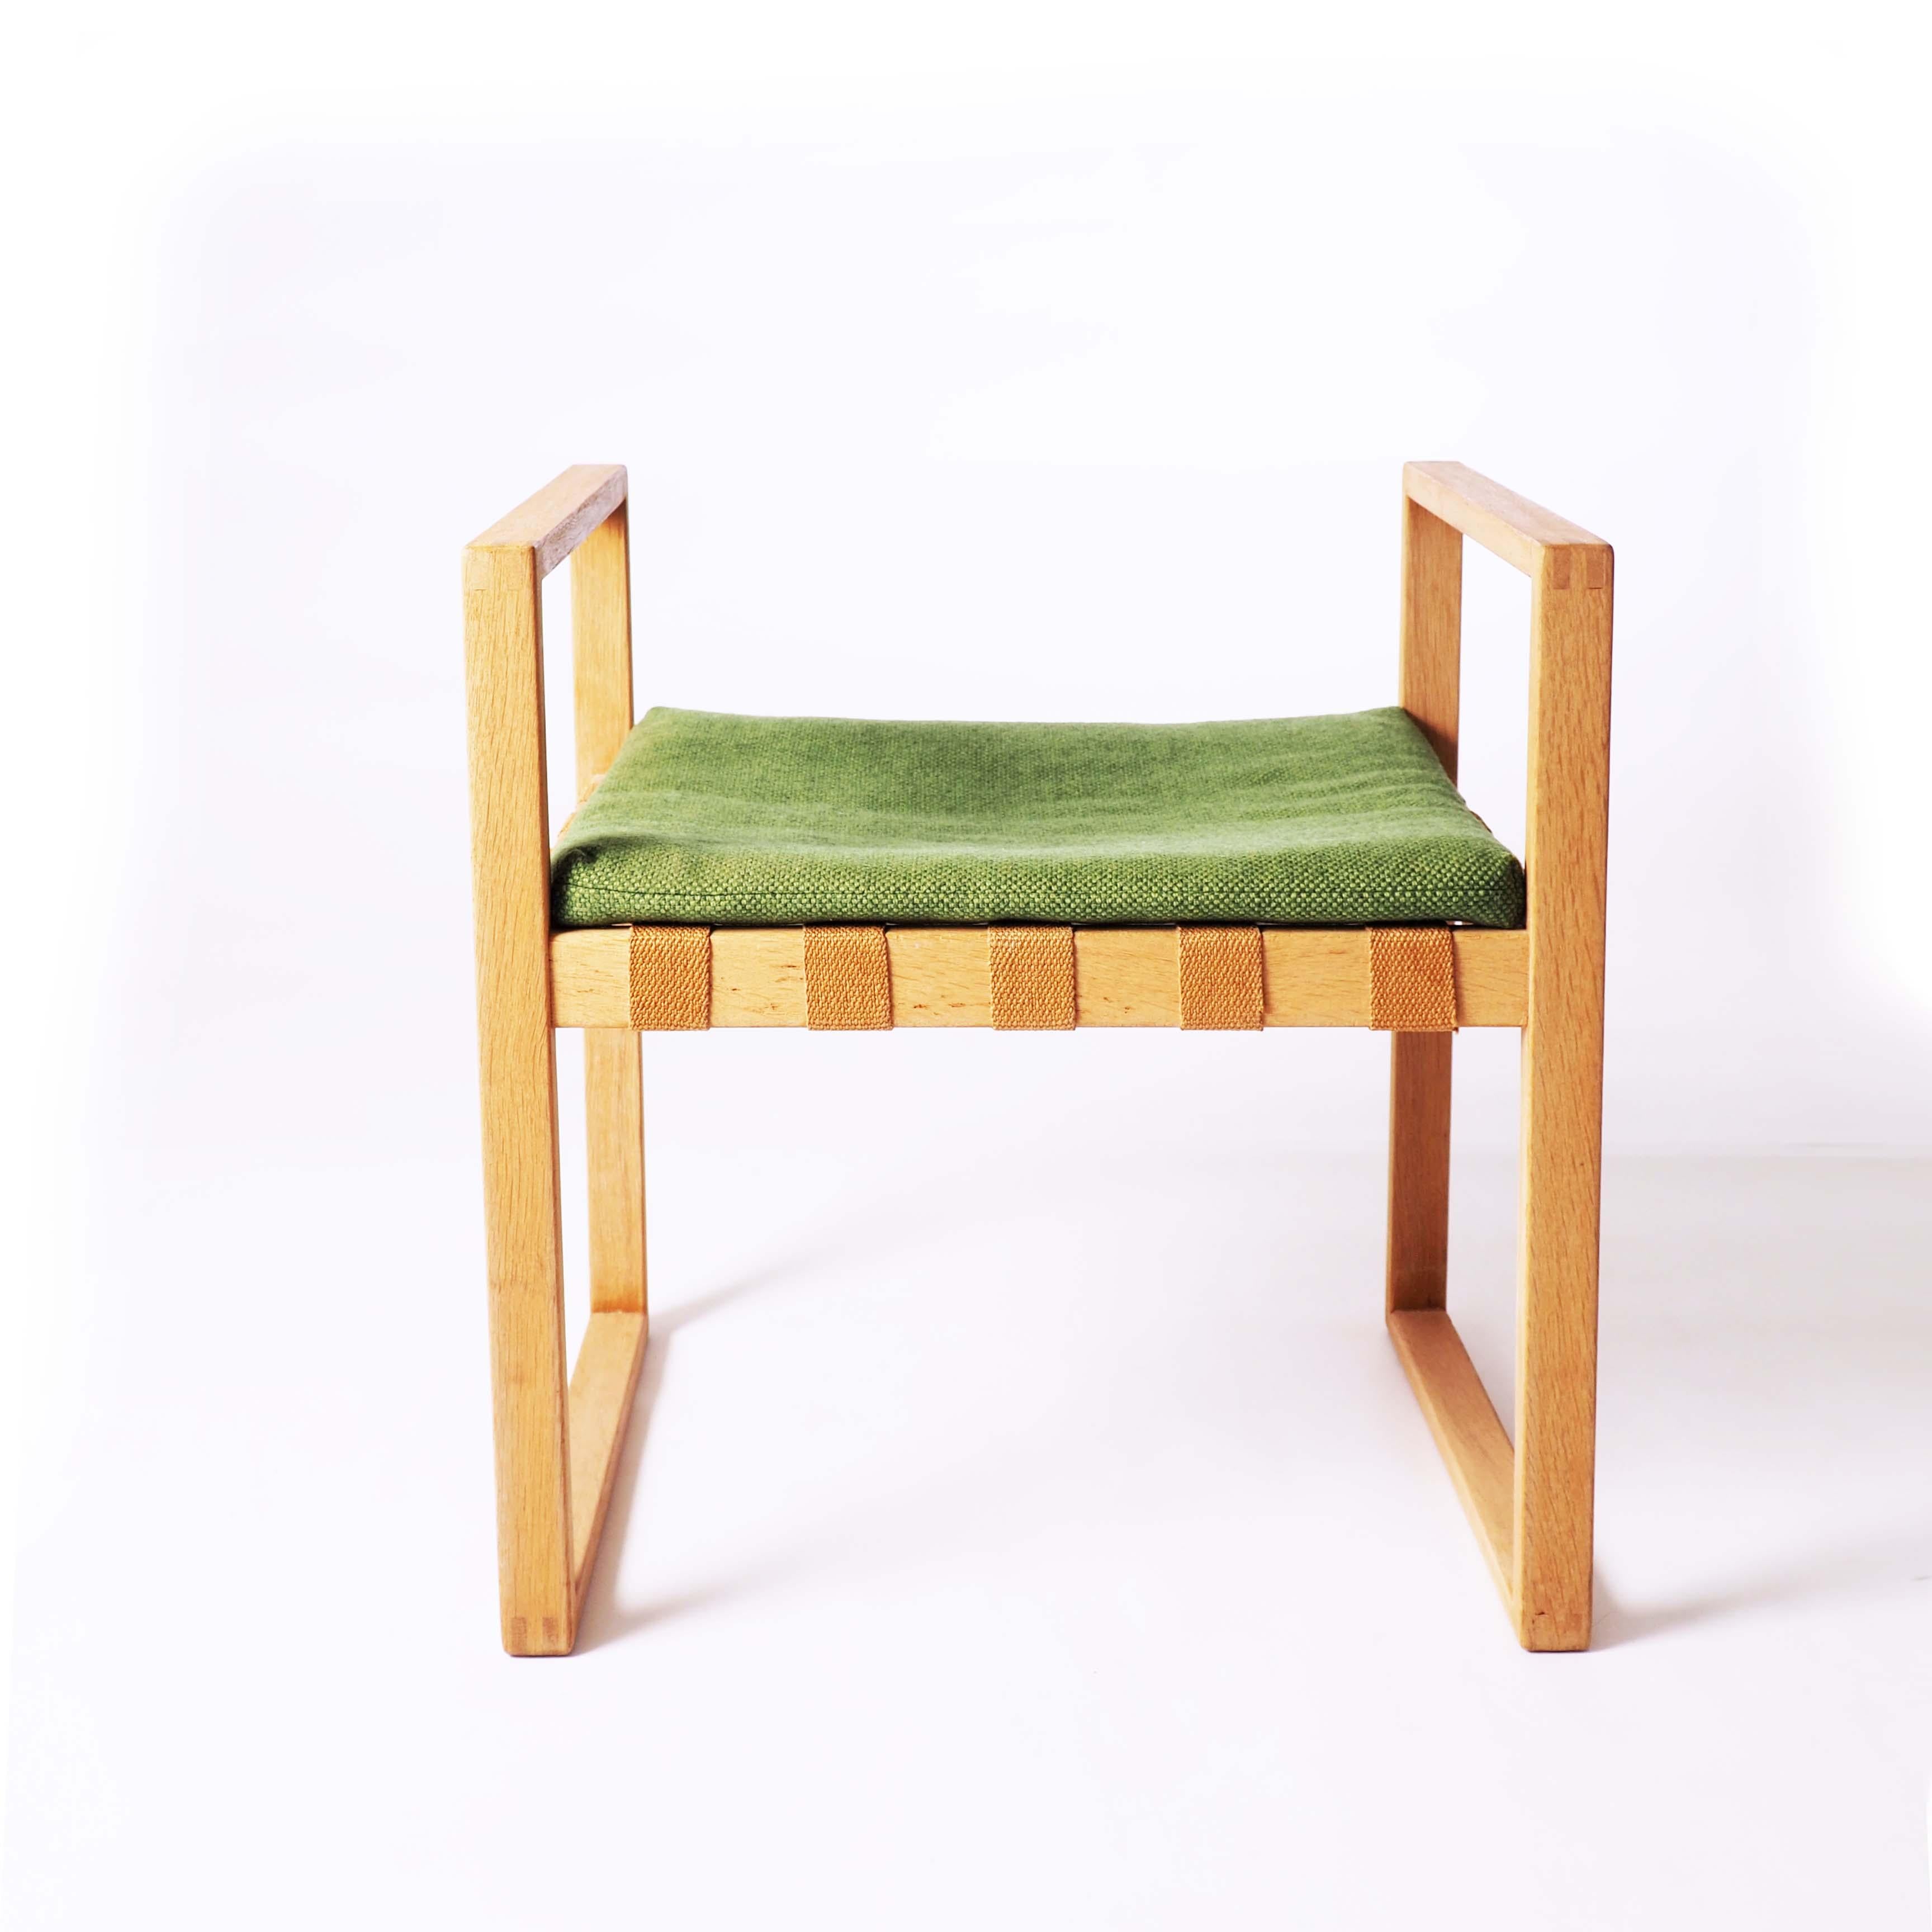 This stool was designed by Swedish designer Åke Fribyter and made in solid oak at Nybrofabriken, Fröseke. The details in the woodwork are in high quality. The pad has got the original upholstery in wool and is in very good condition.